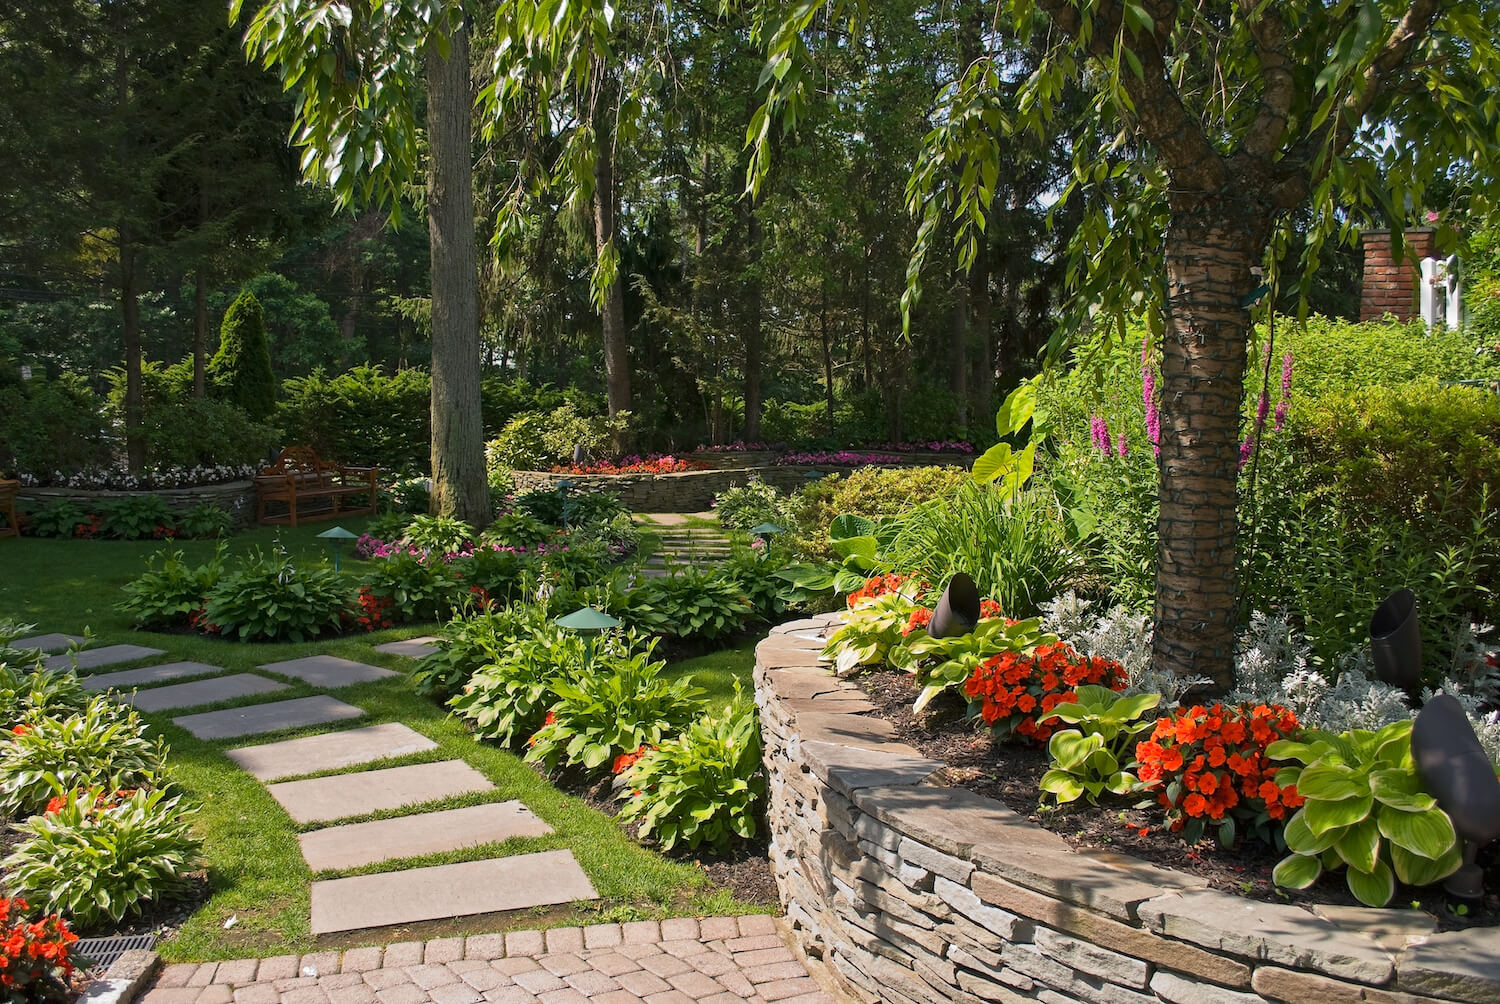 Transform Your Outdoor Space with a Brand New Stone Retaining Wall garden ideas repair